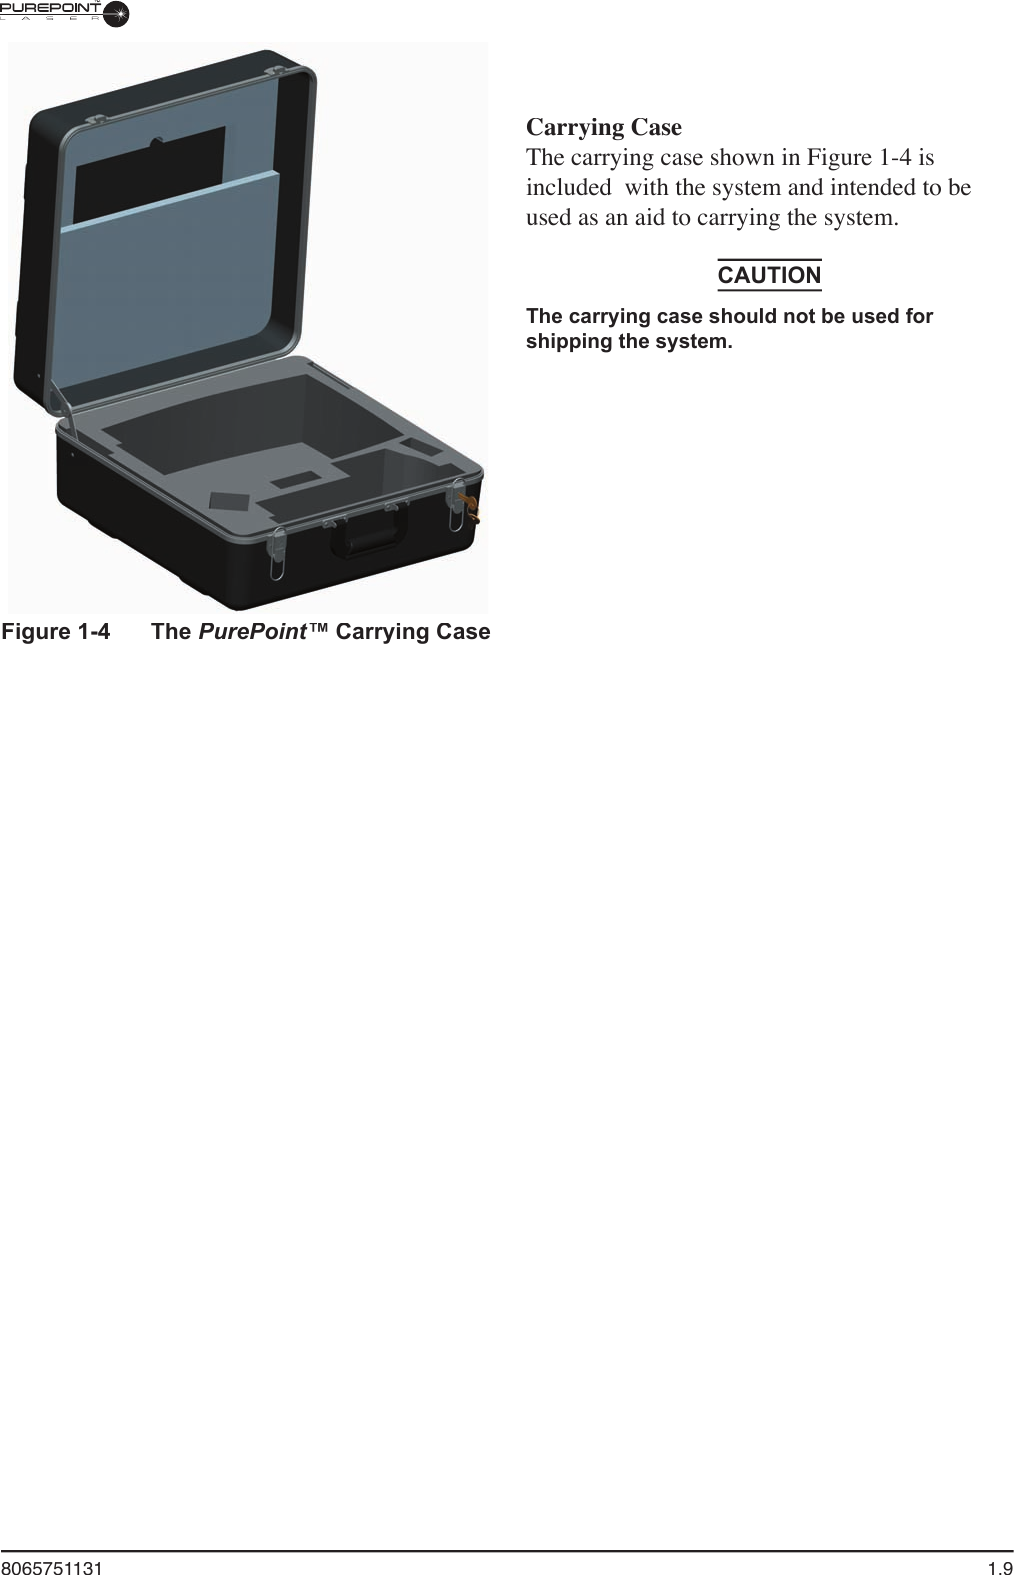 8065751131  1.9Figure 1-4  The PurePoint™ Carrying CaseCarrying CaseThe carrying case shown in Figure 1-4 is included  with the system and intended to be used as an aid to carrying the system.CAUTIONThe carrying case should not be used for shipping the system.